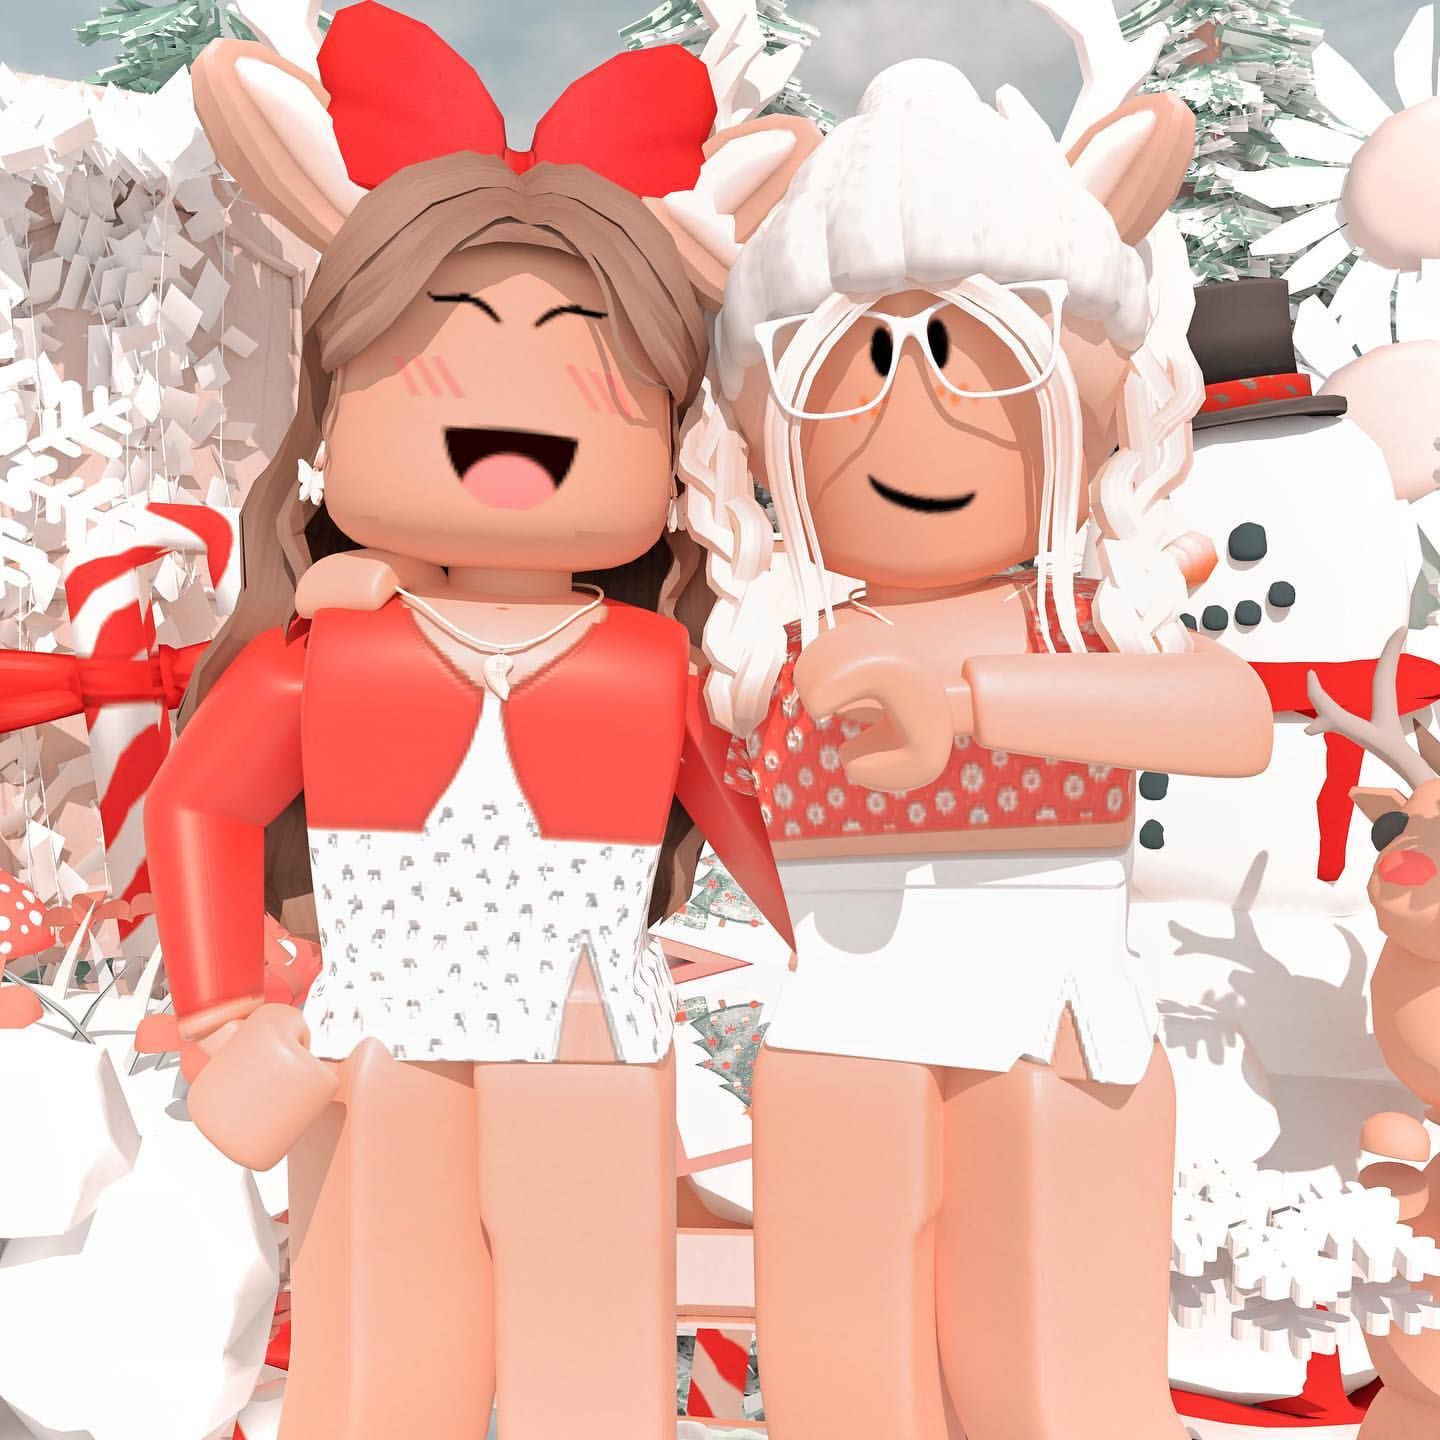 100+] Bff Roblox Wallpapers